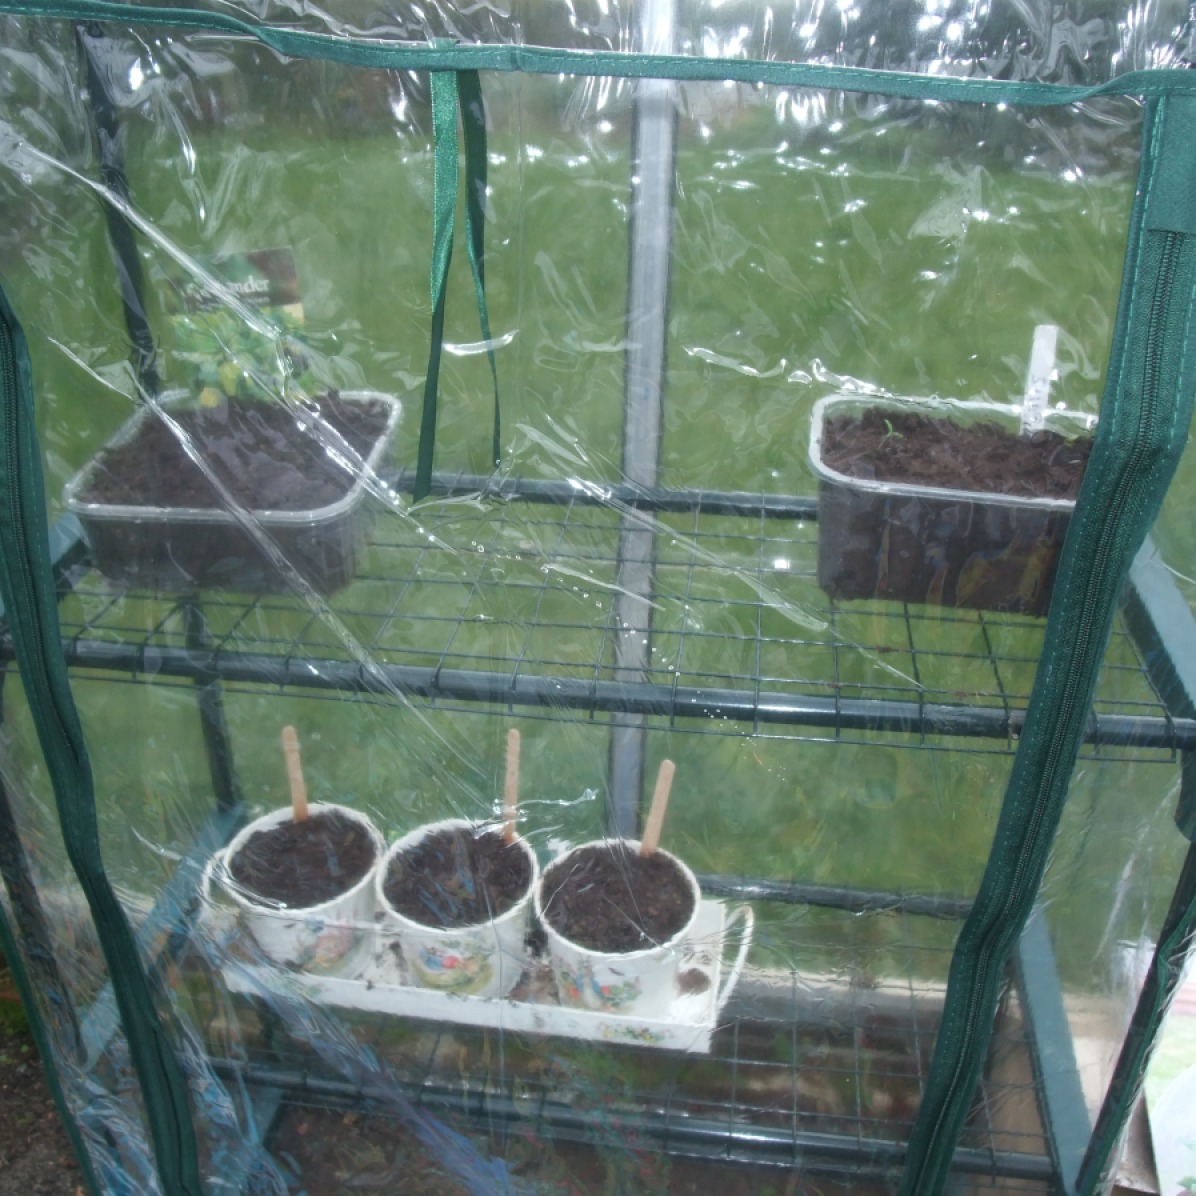 My mini greenhouse, with coriander, lettuce and some extra tomato seedlings!